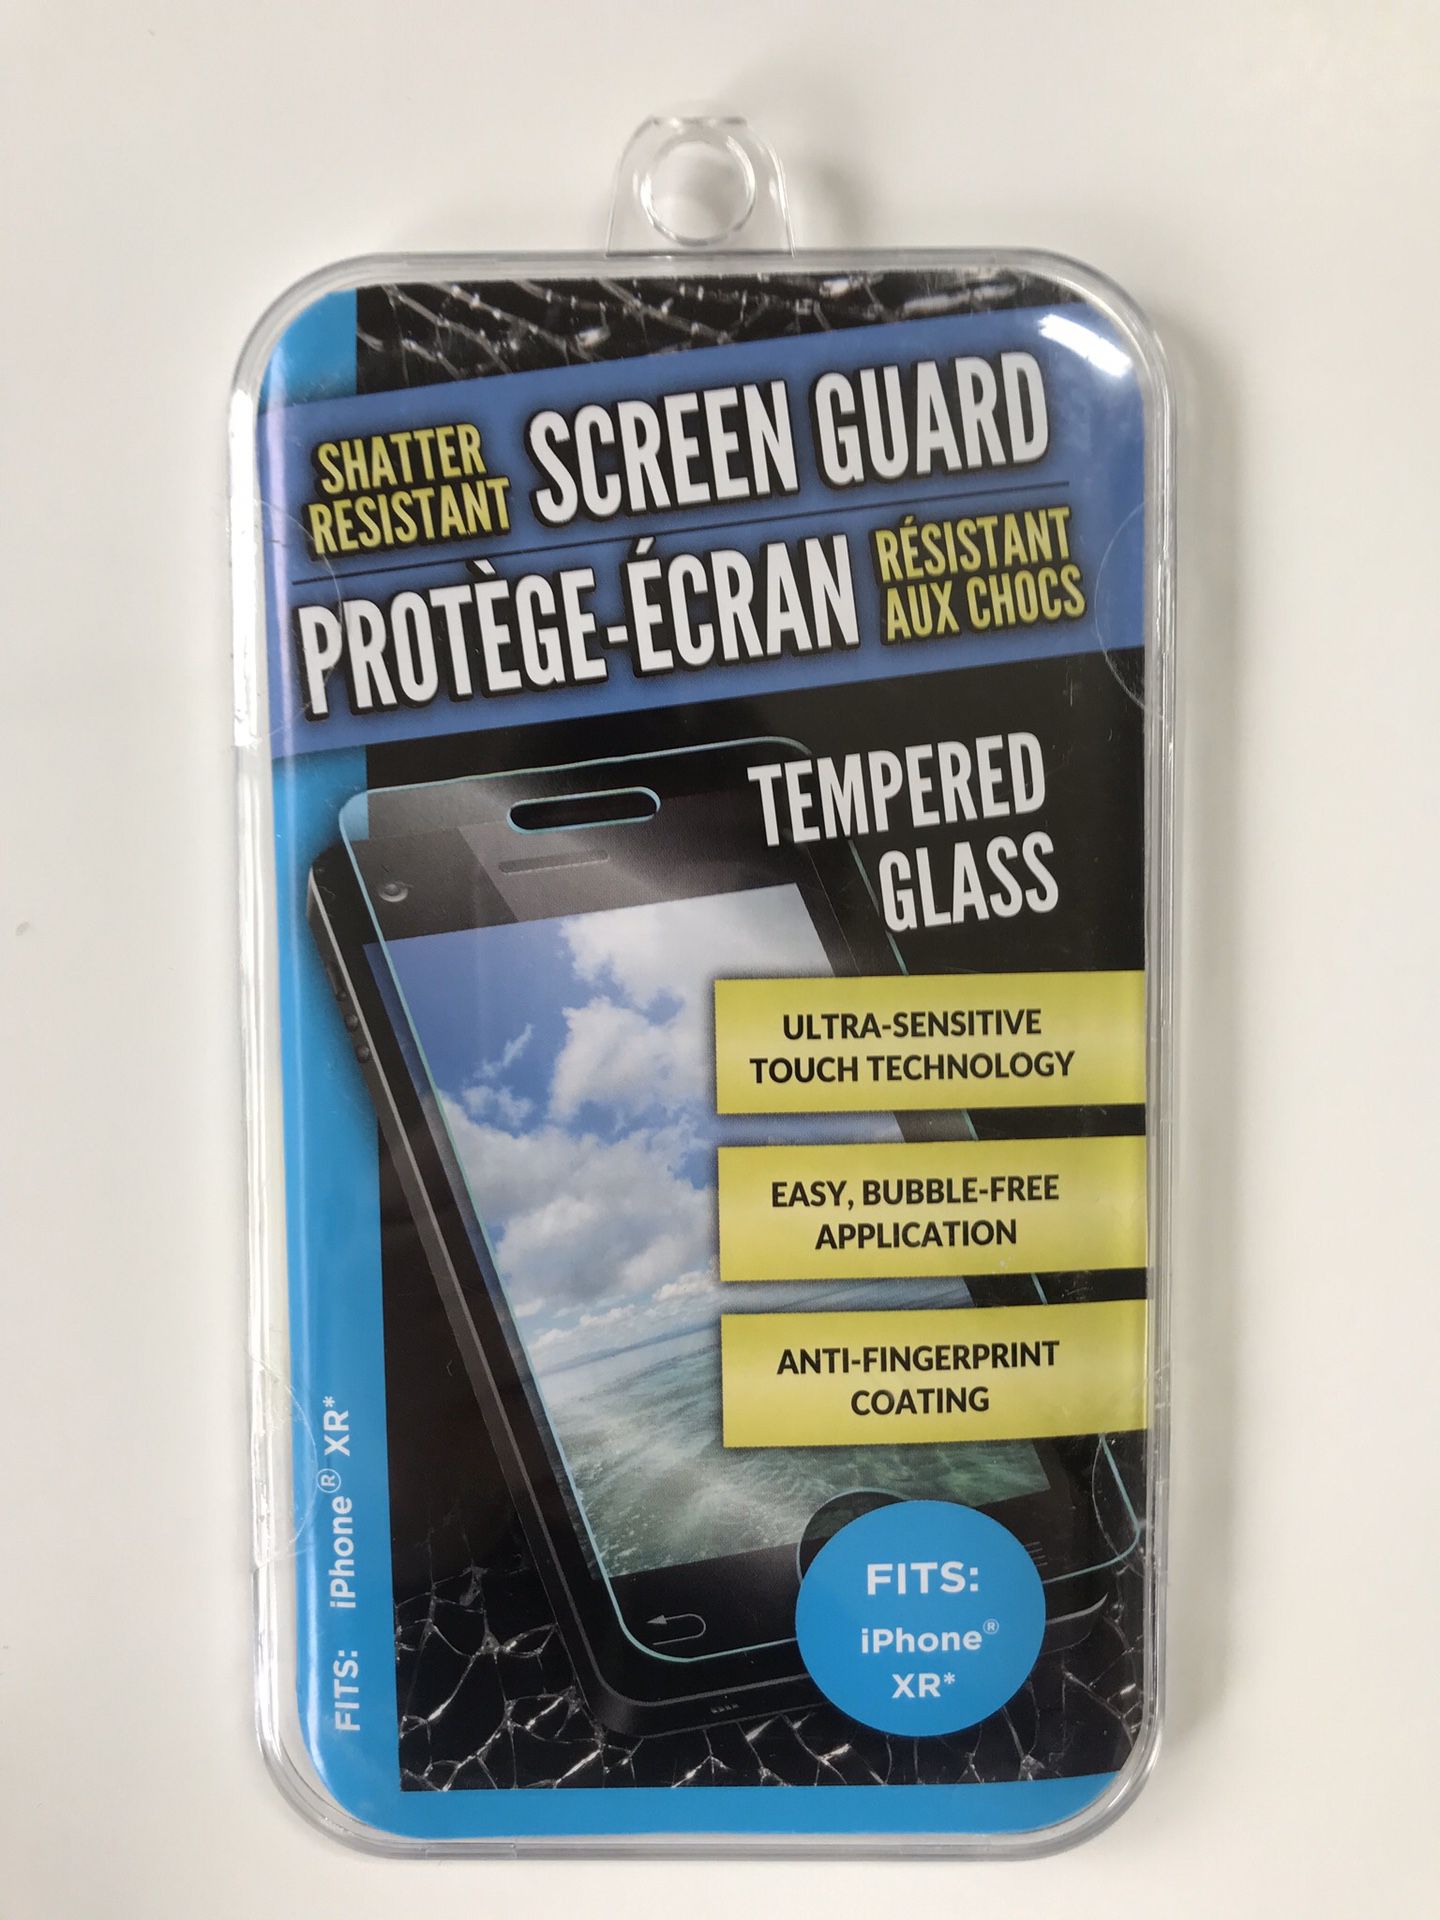 Screen Guard Shatter Resistant